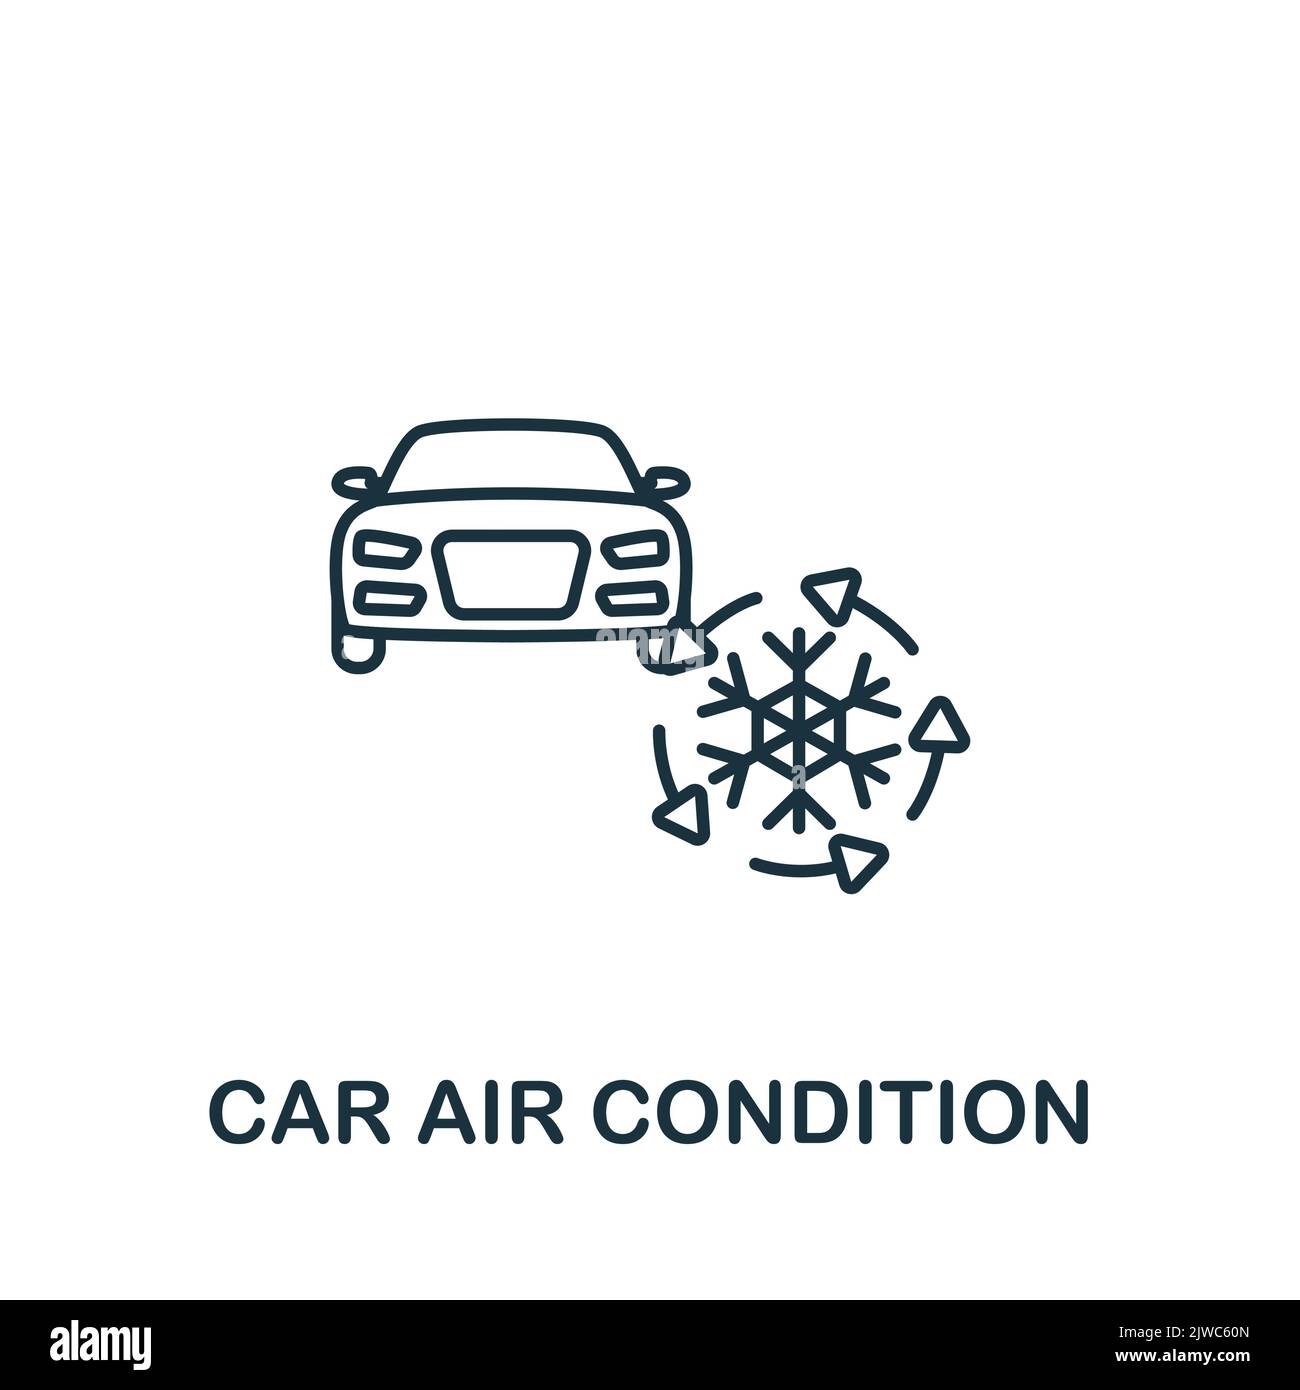 Car Air Condition icon. Line simple line Car Service icon for templates, web design and infographics Stock Vector